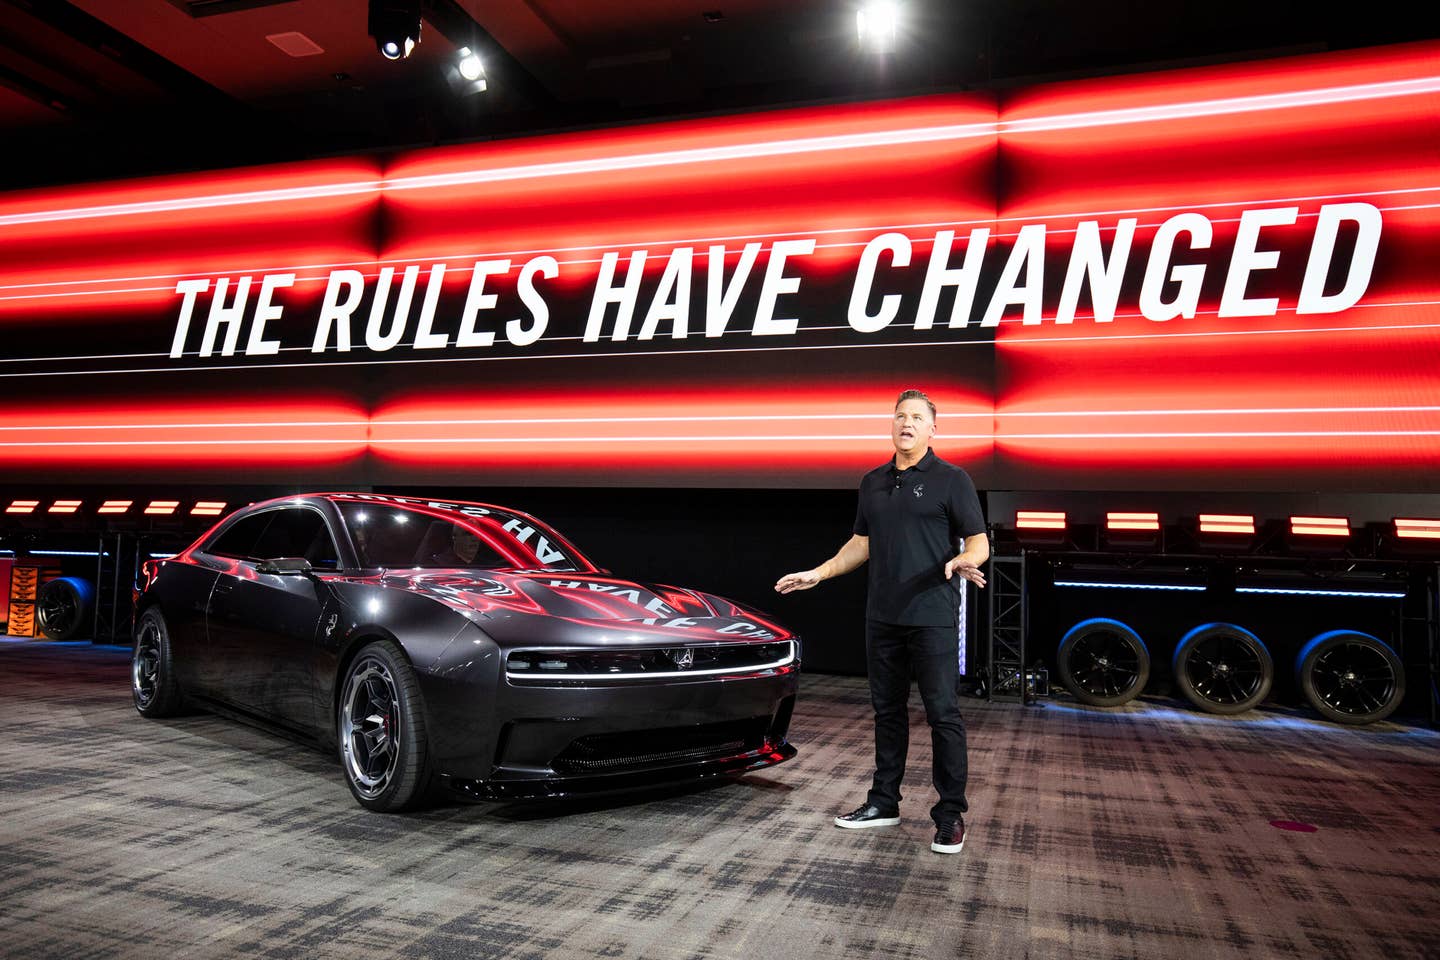 PONTIAC, MI - AUGUST 17: Tim Kuniskis, CEO of Dodge Brand, Stellantis, introduces the Dodge Charger Daytona SRT Concept all-electric muscle car at its world reveal during Dodge's Speed Week at M1 Concourse on August 17, 2022 in Pontiac, Michigan. A production electric vehicle from Dodge is expected to launch in 2024. (Photo by Bill Pugliano/Getty Images)